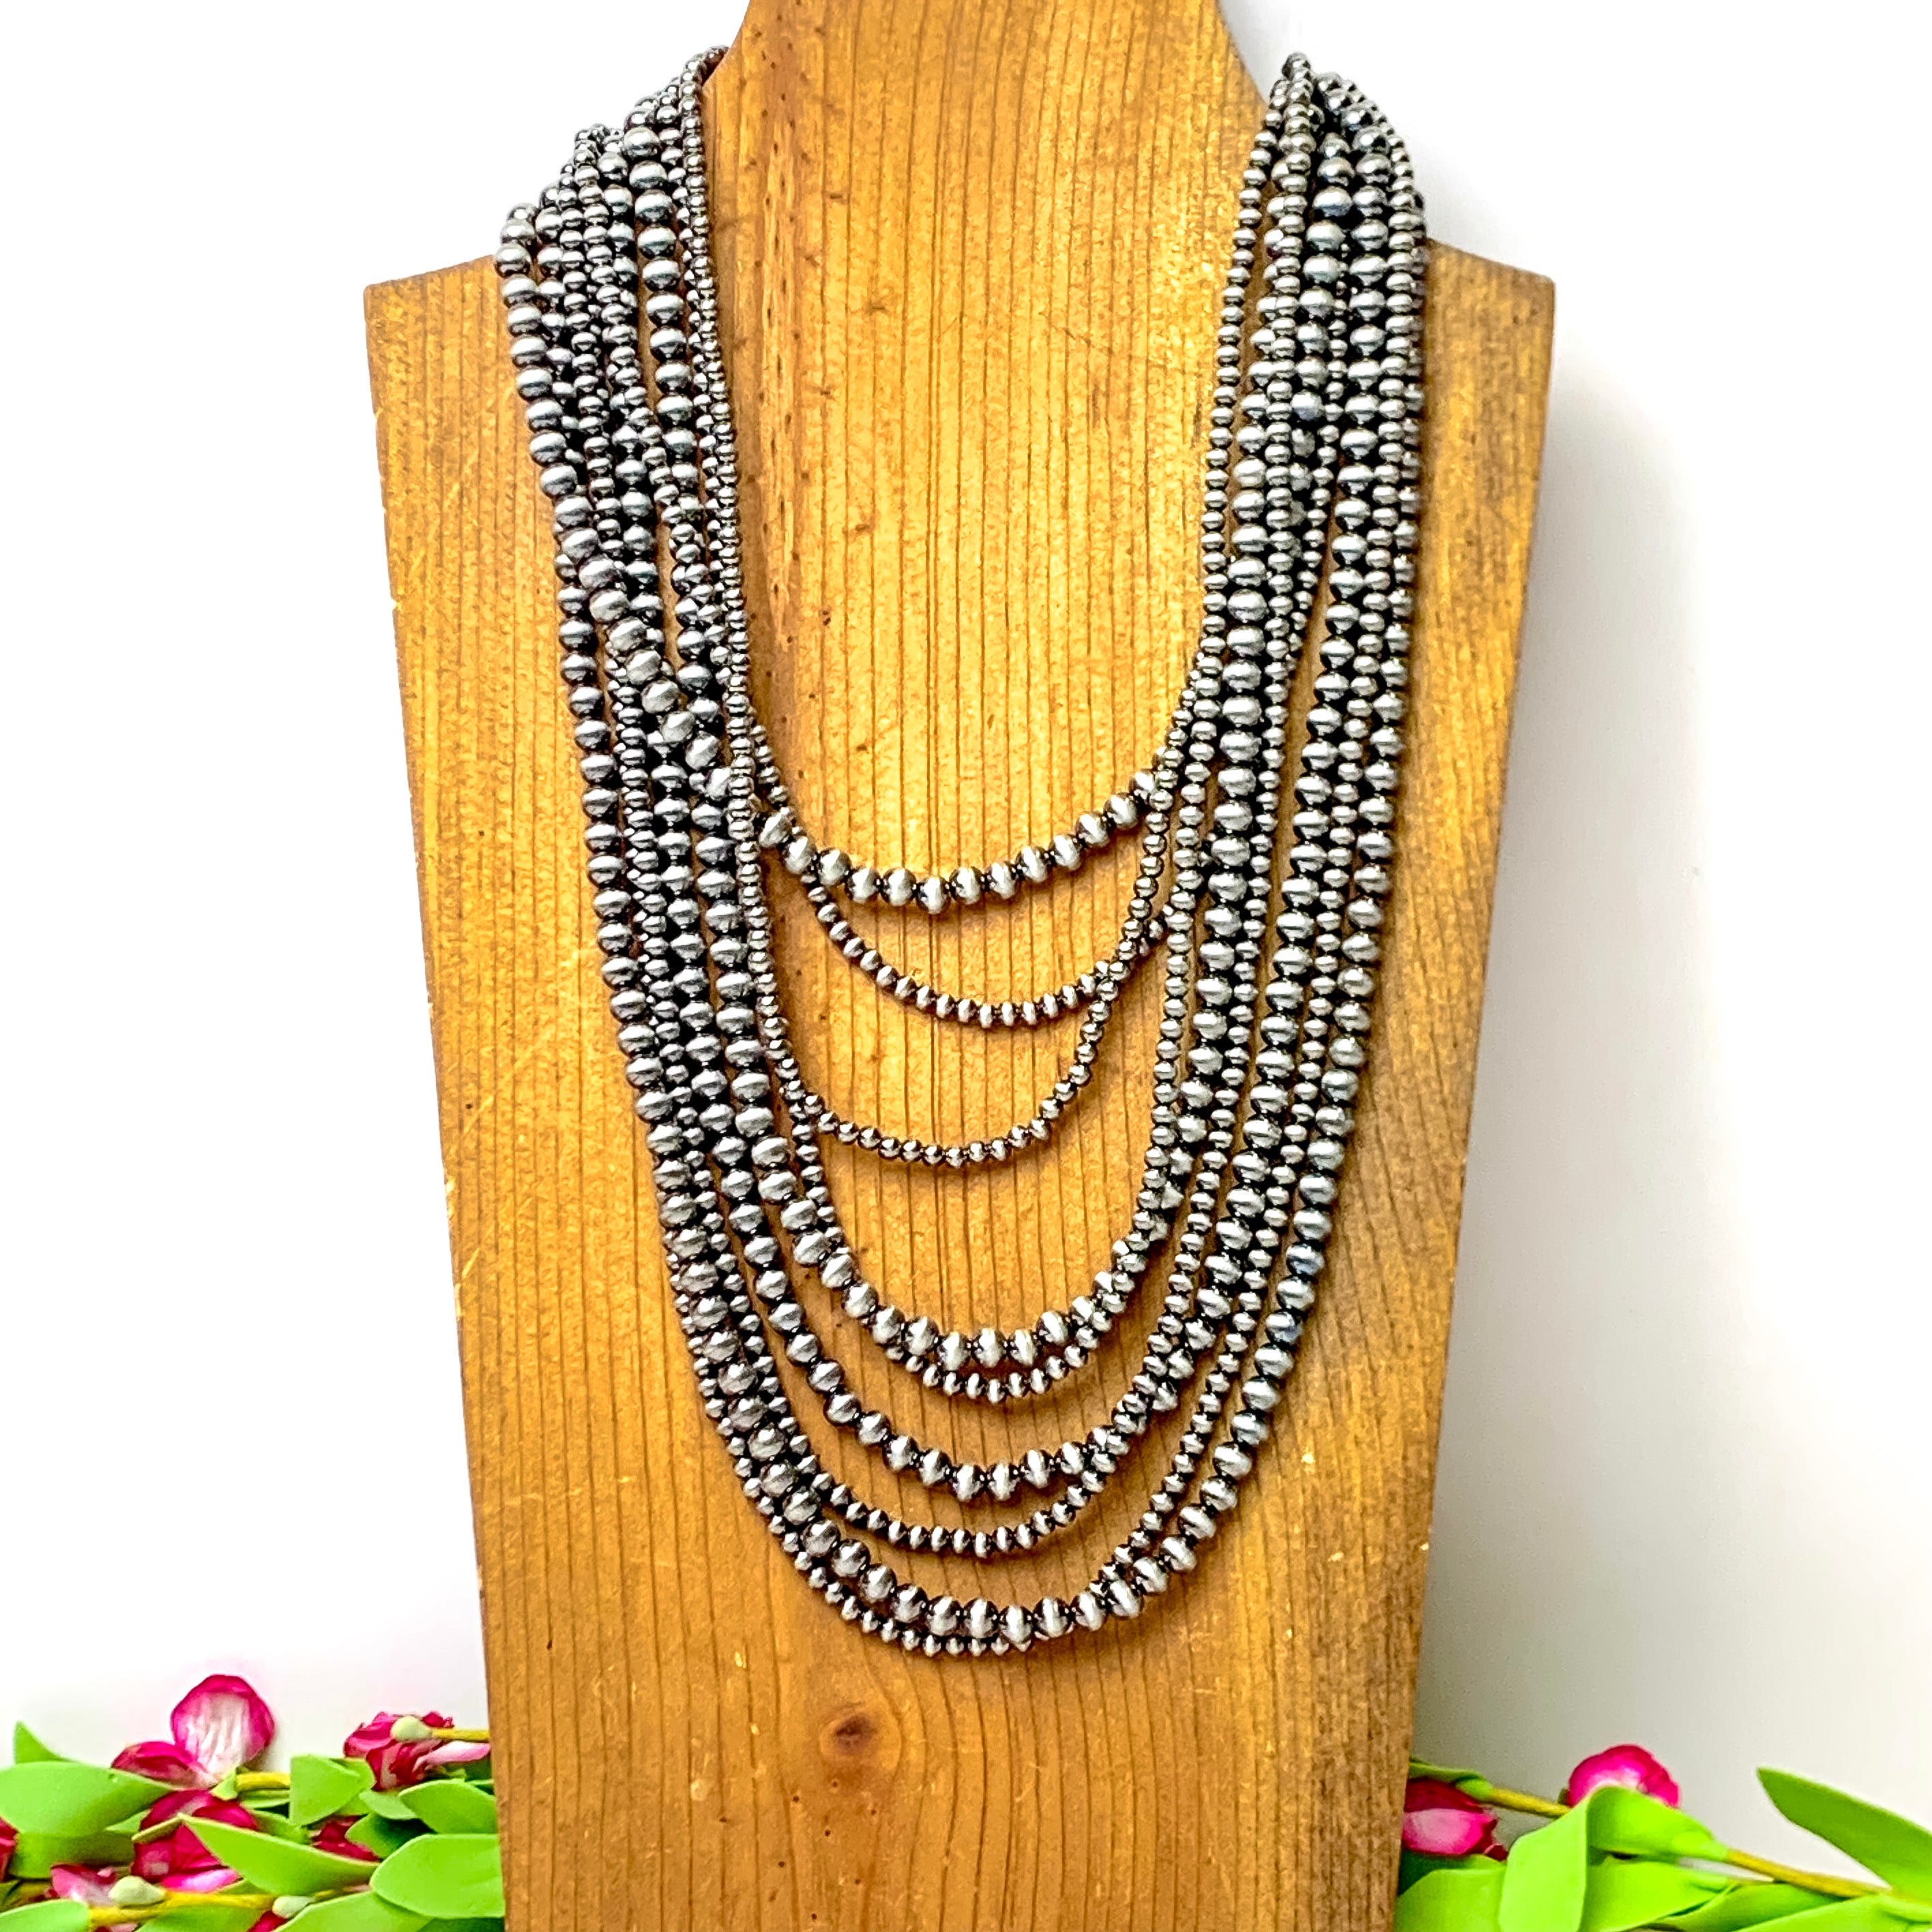 Nine Strand Faux Navajo Pearl Necklace in Silver Tone - Giddy Up Glamour Boutique